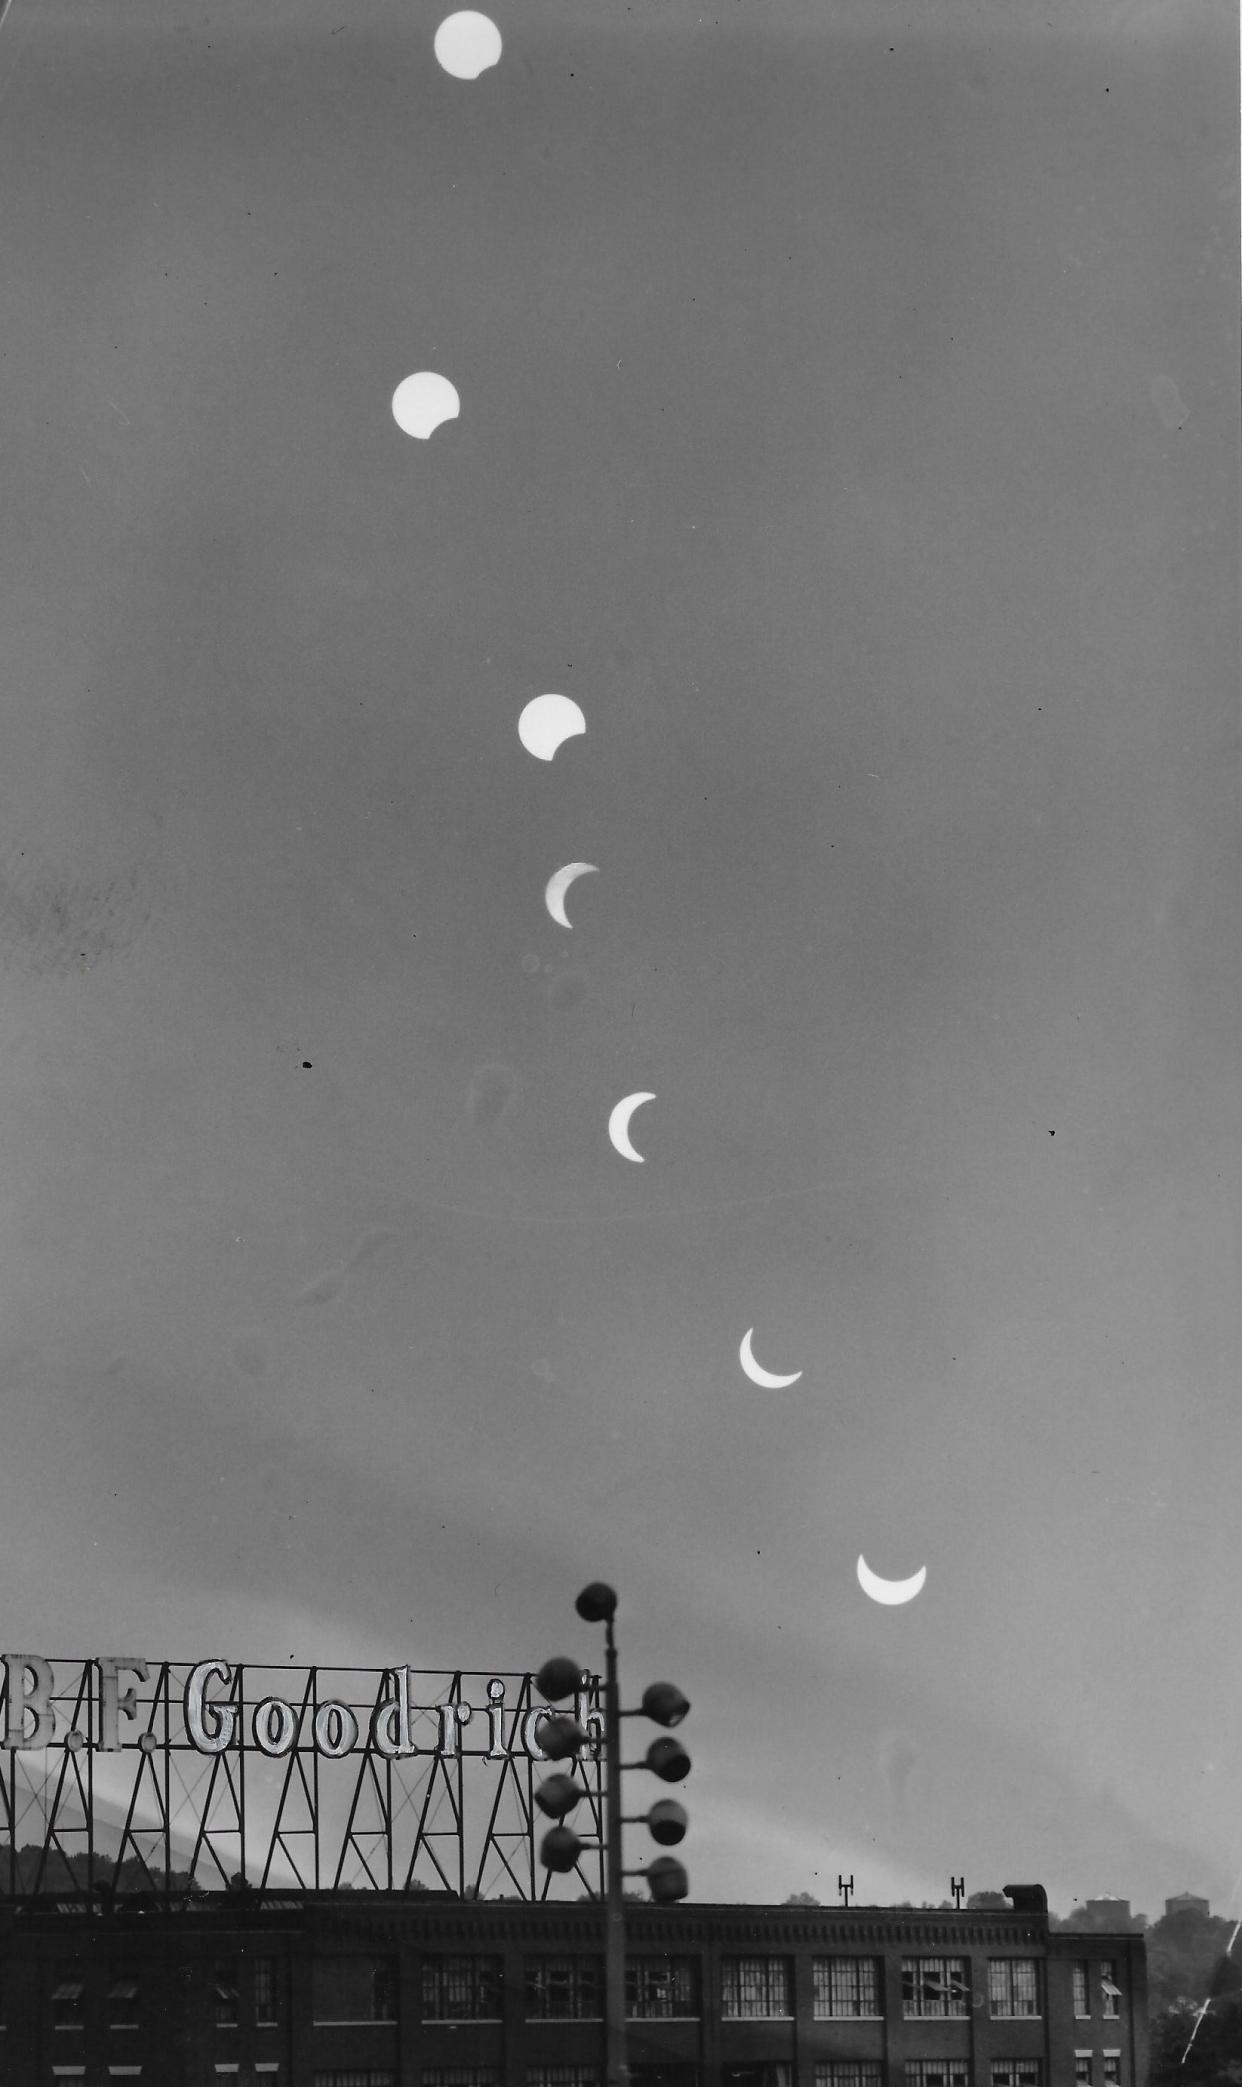 Beacon Journal photographer Ted Walls captures a sequence of shots on the same film as the moon obscures the sun July 20, 1963, over B.F. Goodrich headquarters in downtown Akron. Heavy clouds interrupted the sequence.